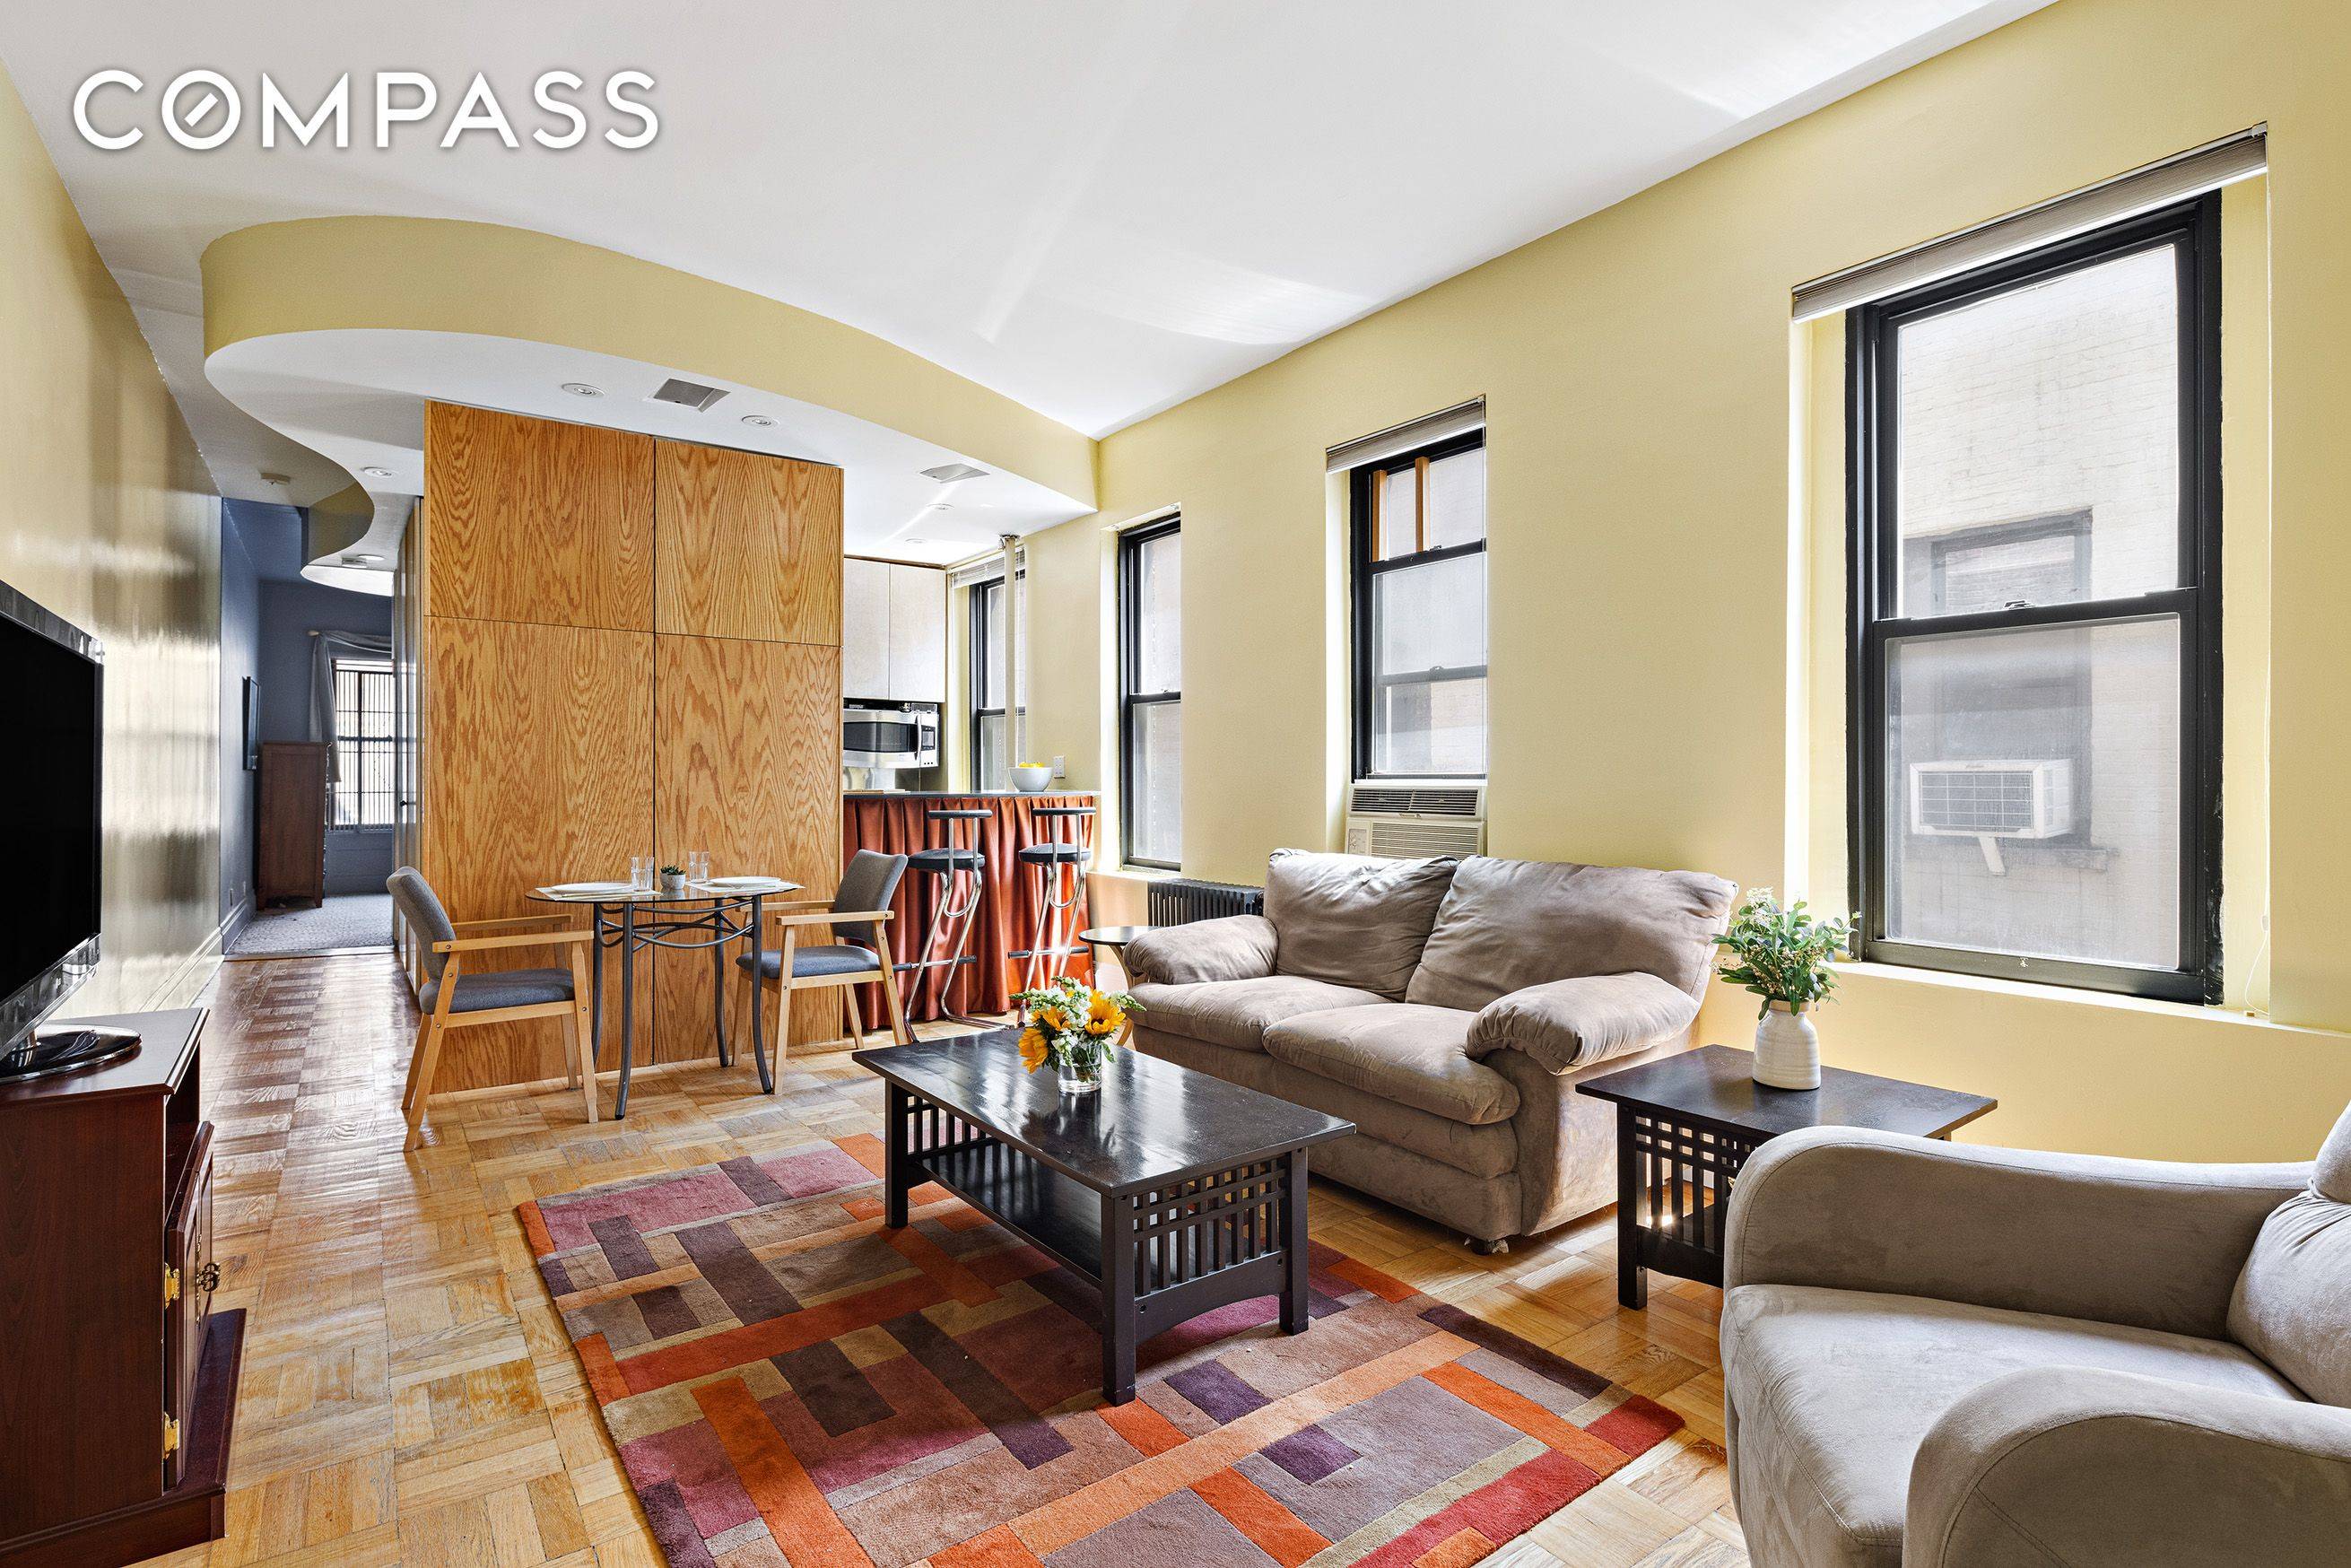 Welcome to this charming one bedroom coop on quiet, tree lined West 83rd Street !